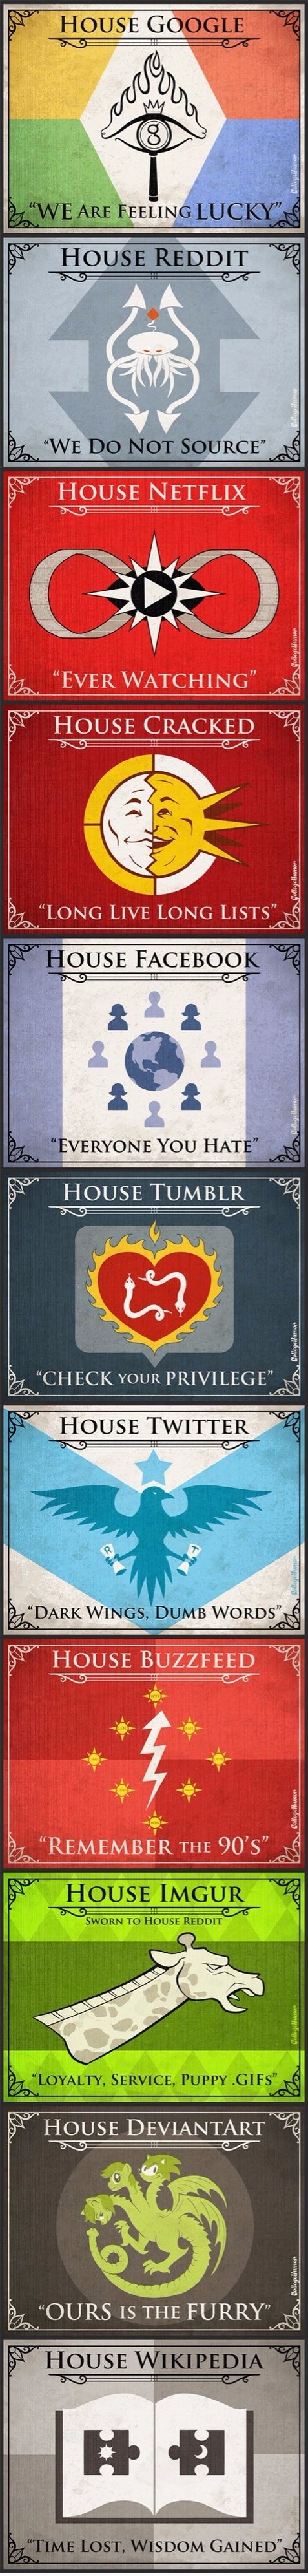 If Popular Websites Were Game of Thrones Houses